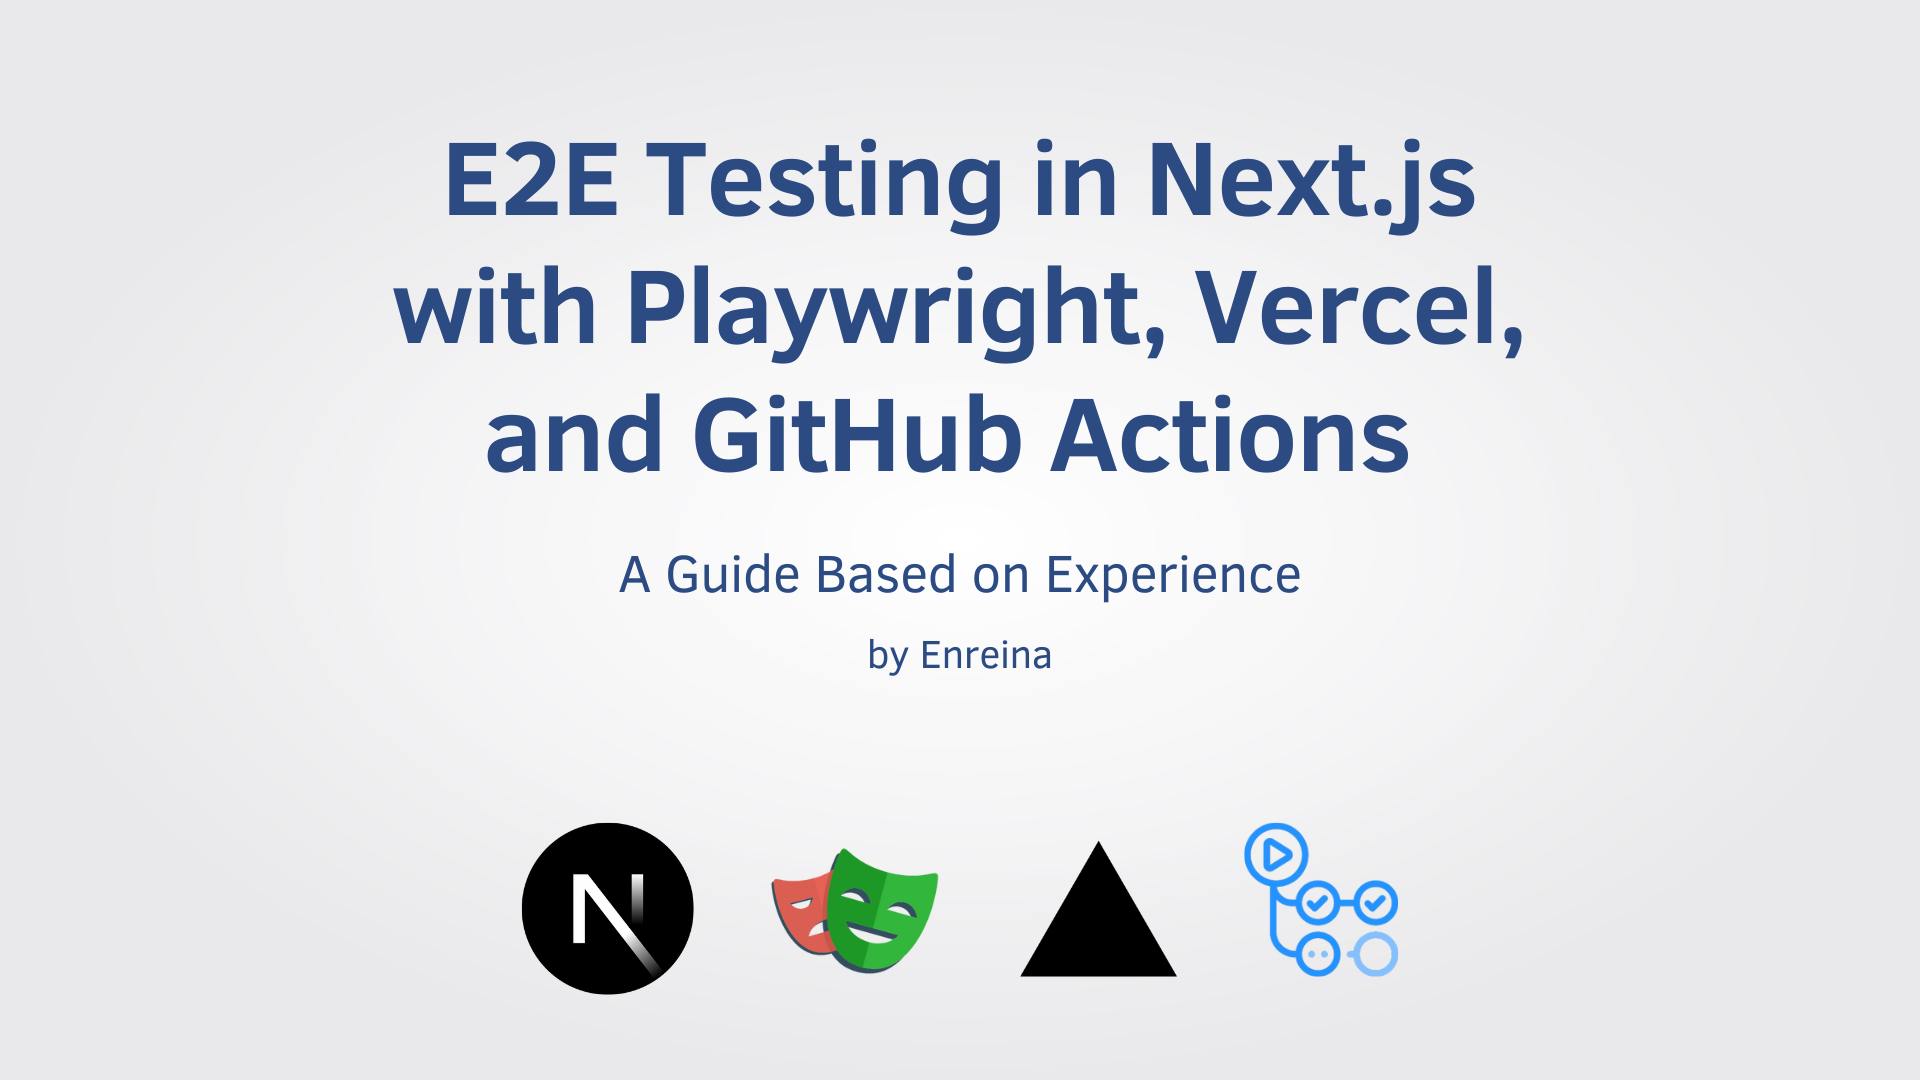 E2E Testing in Next.js with Playwright, Vercel, and GitHub Actions: A Guide Based on Experience